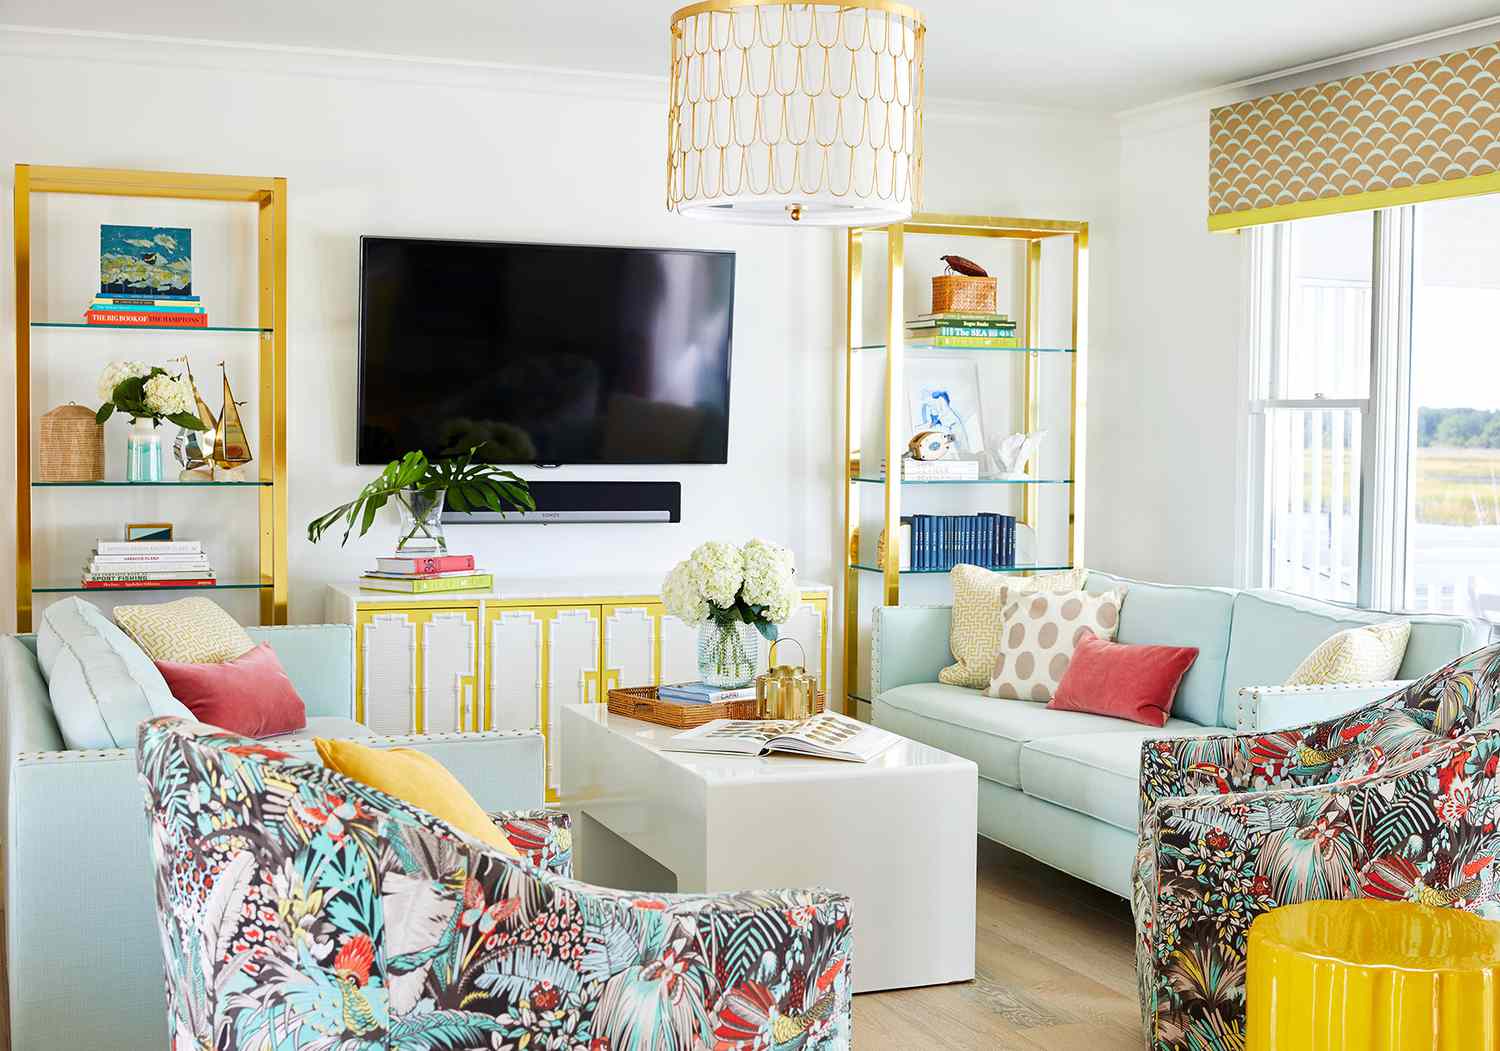 How to decorate with a TV in the living room